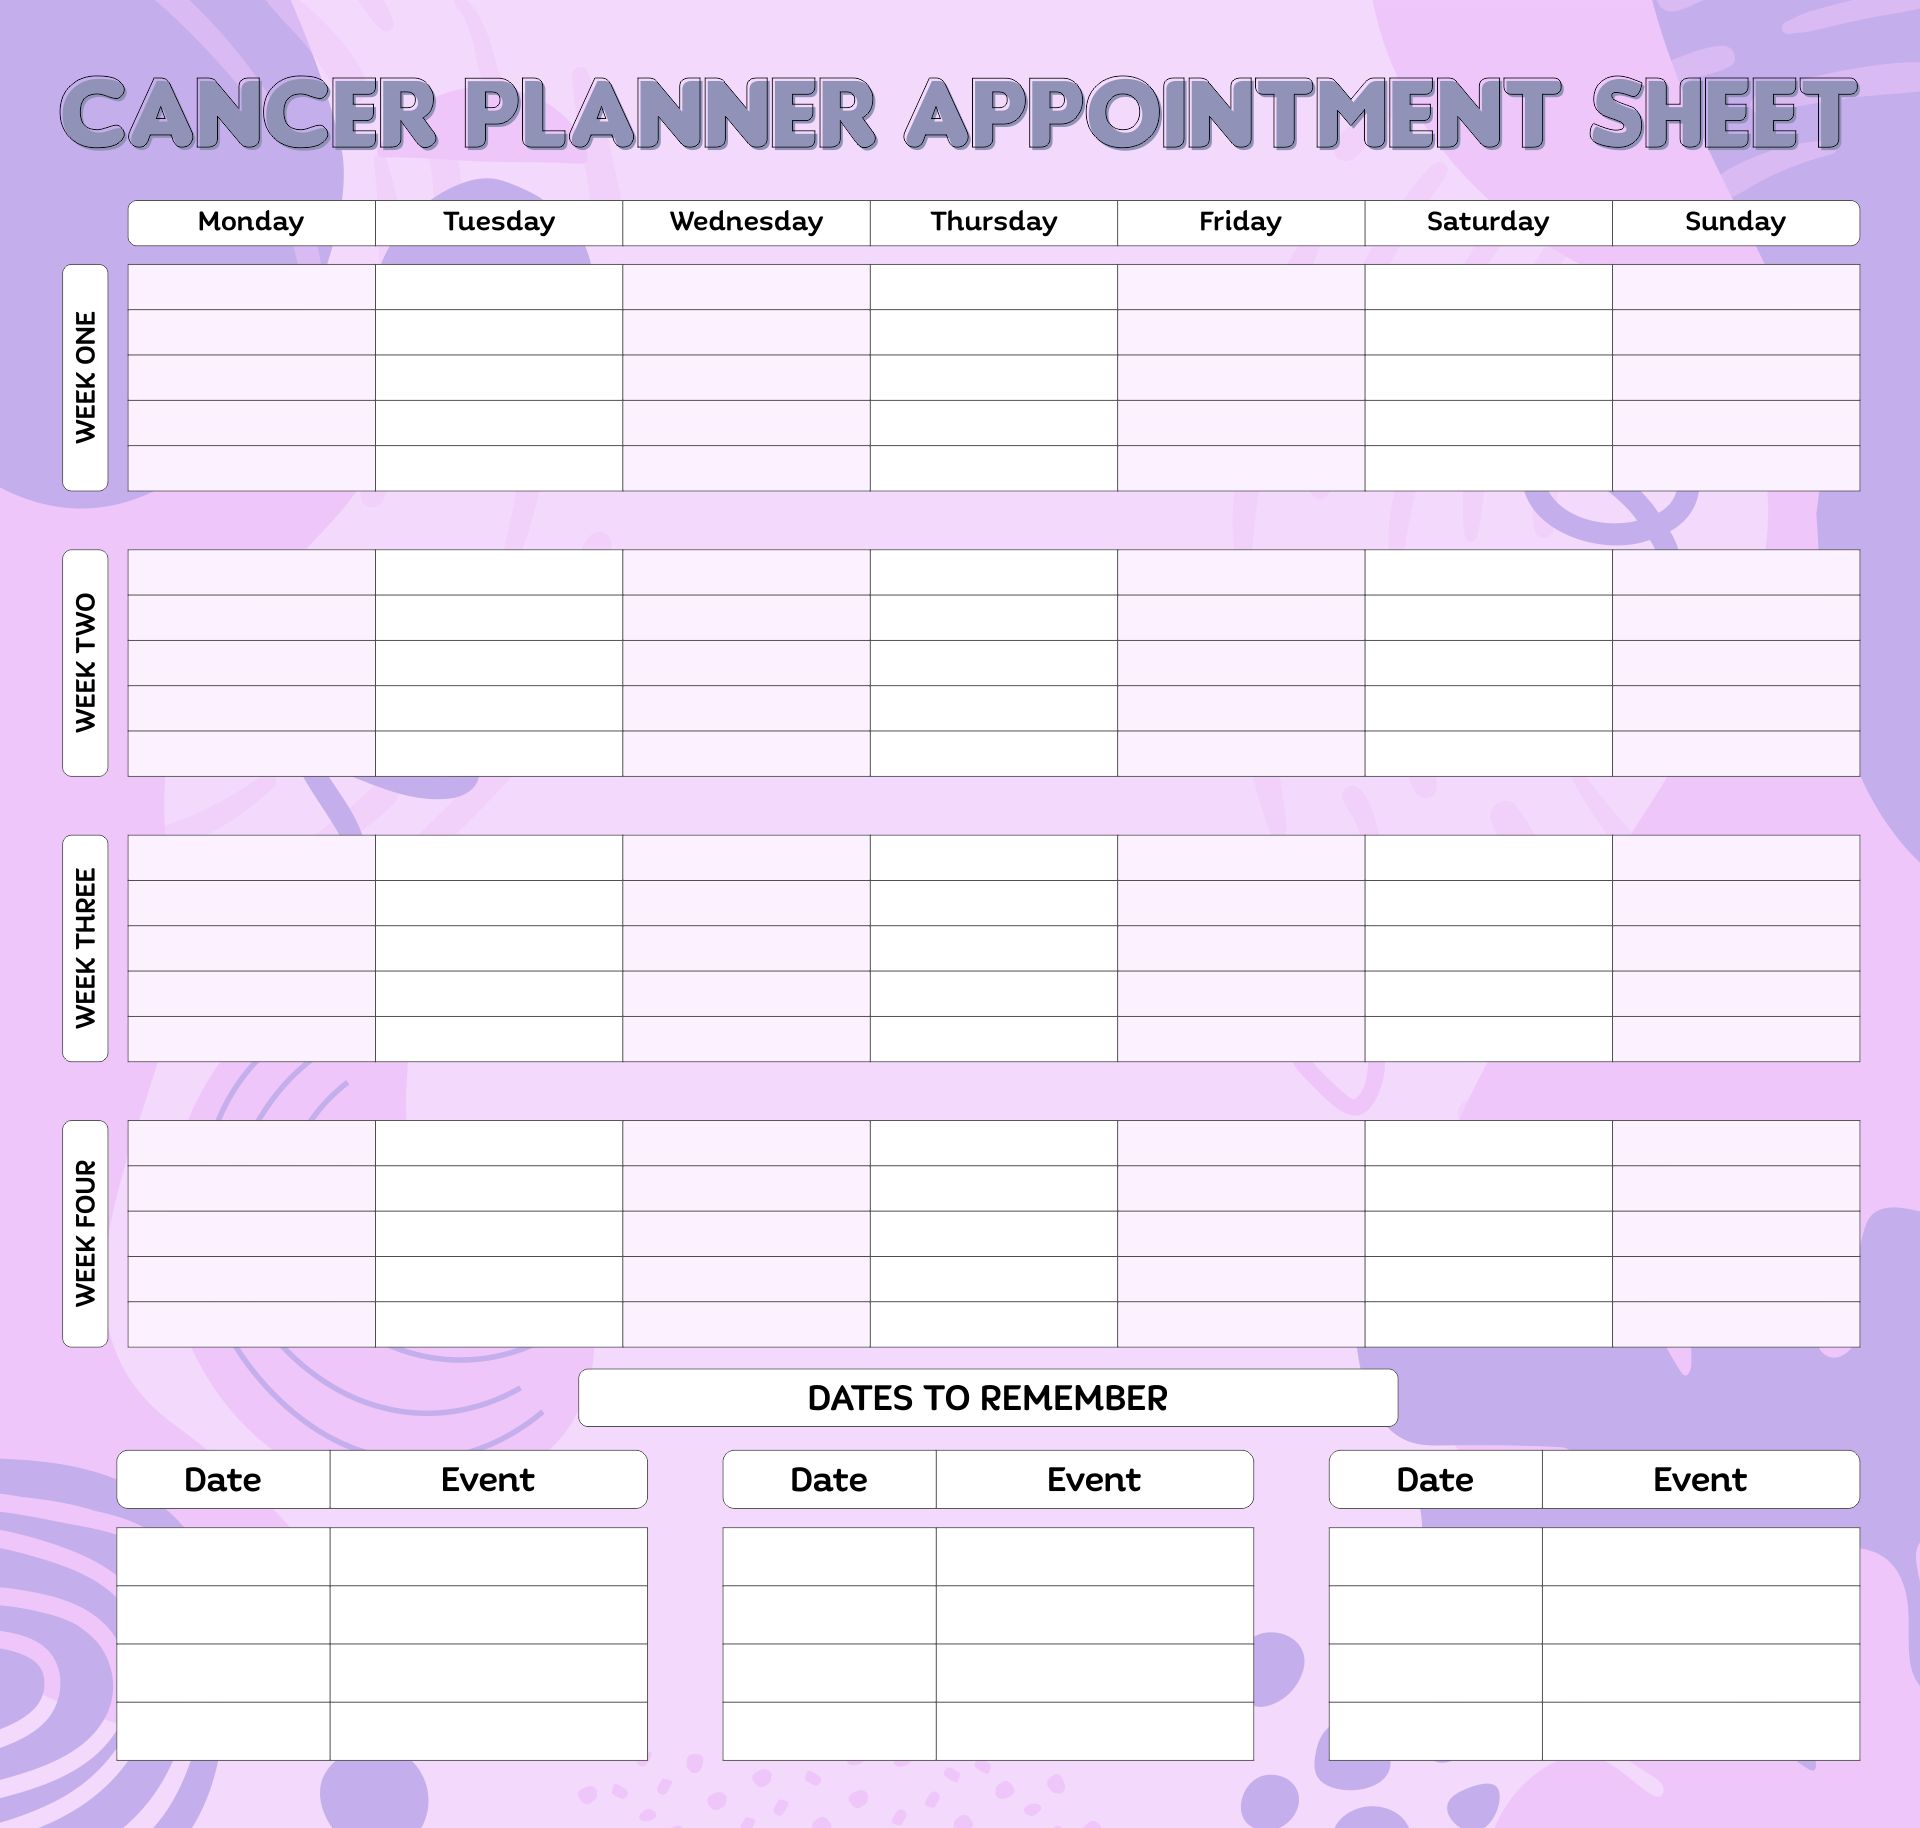 Printable Cancer Planner Appointment Sheet